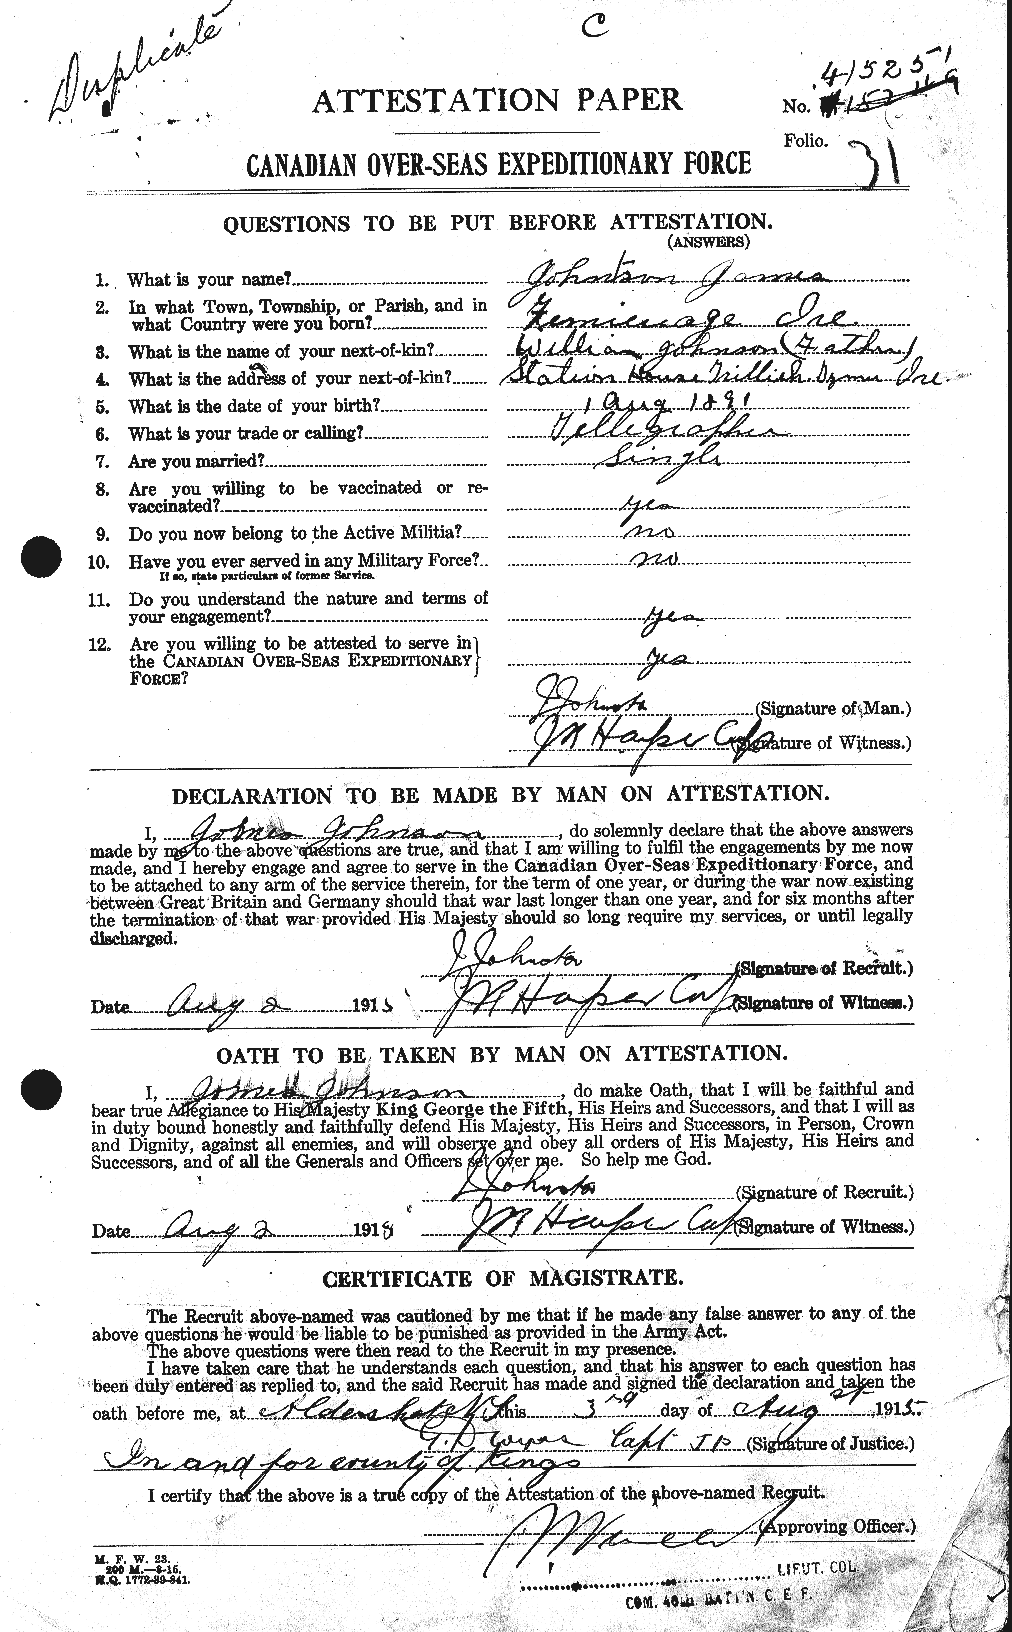 Personnel Records of the First World War - CEF 422694a